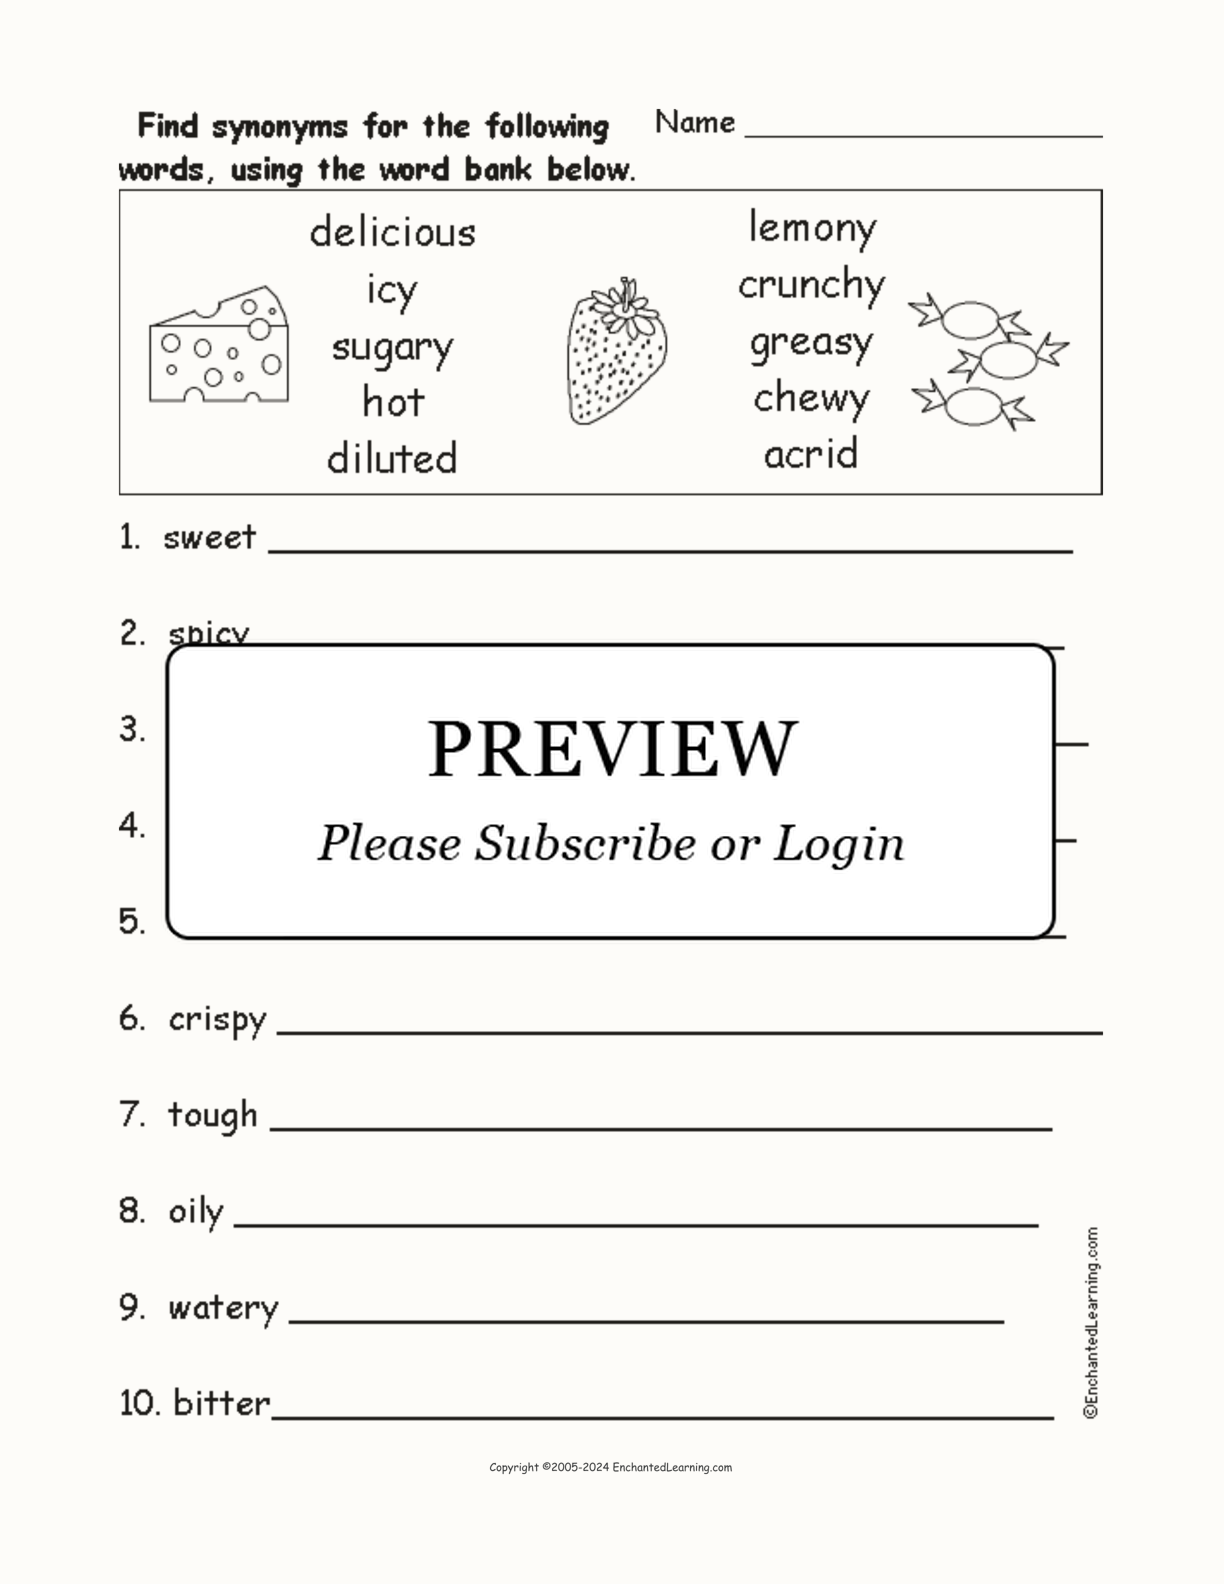 Food Synonyms interactive worksheet page 1